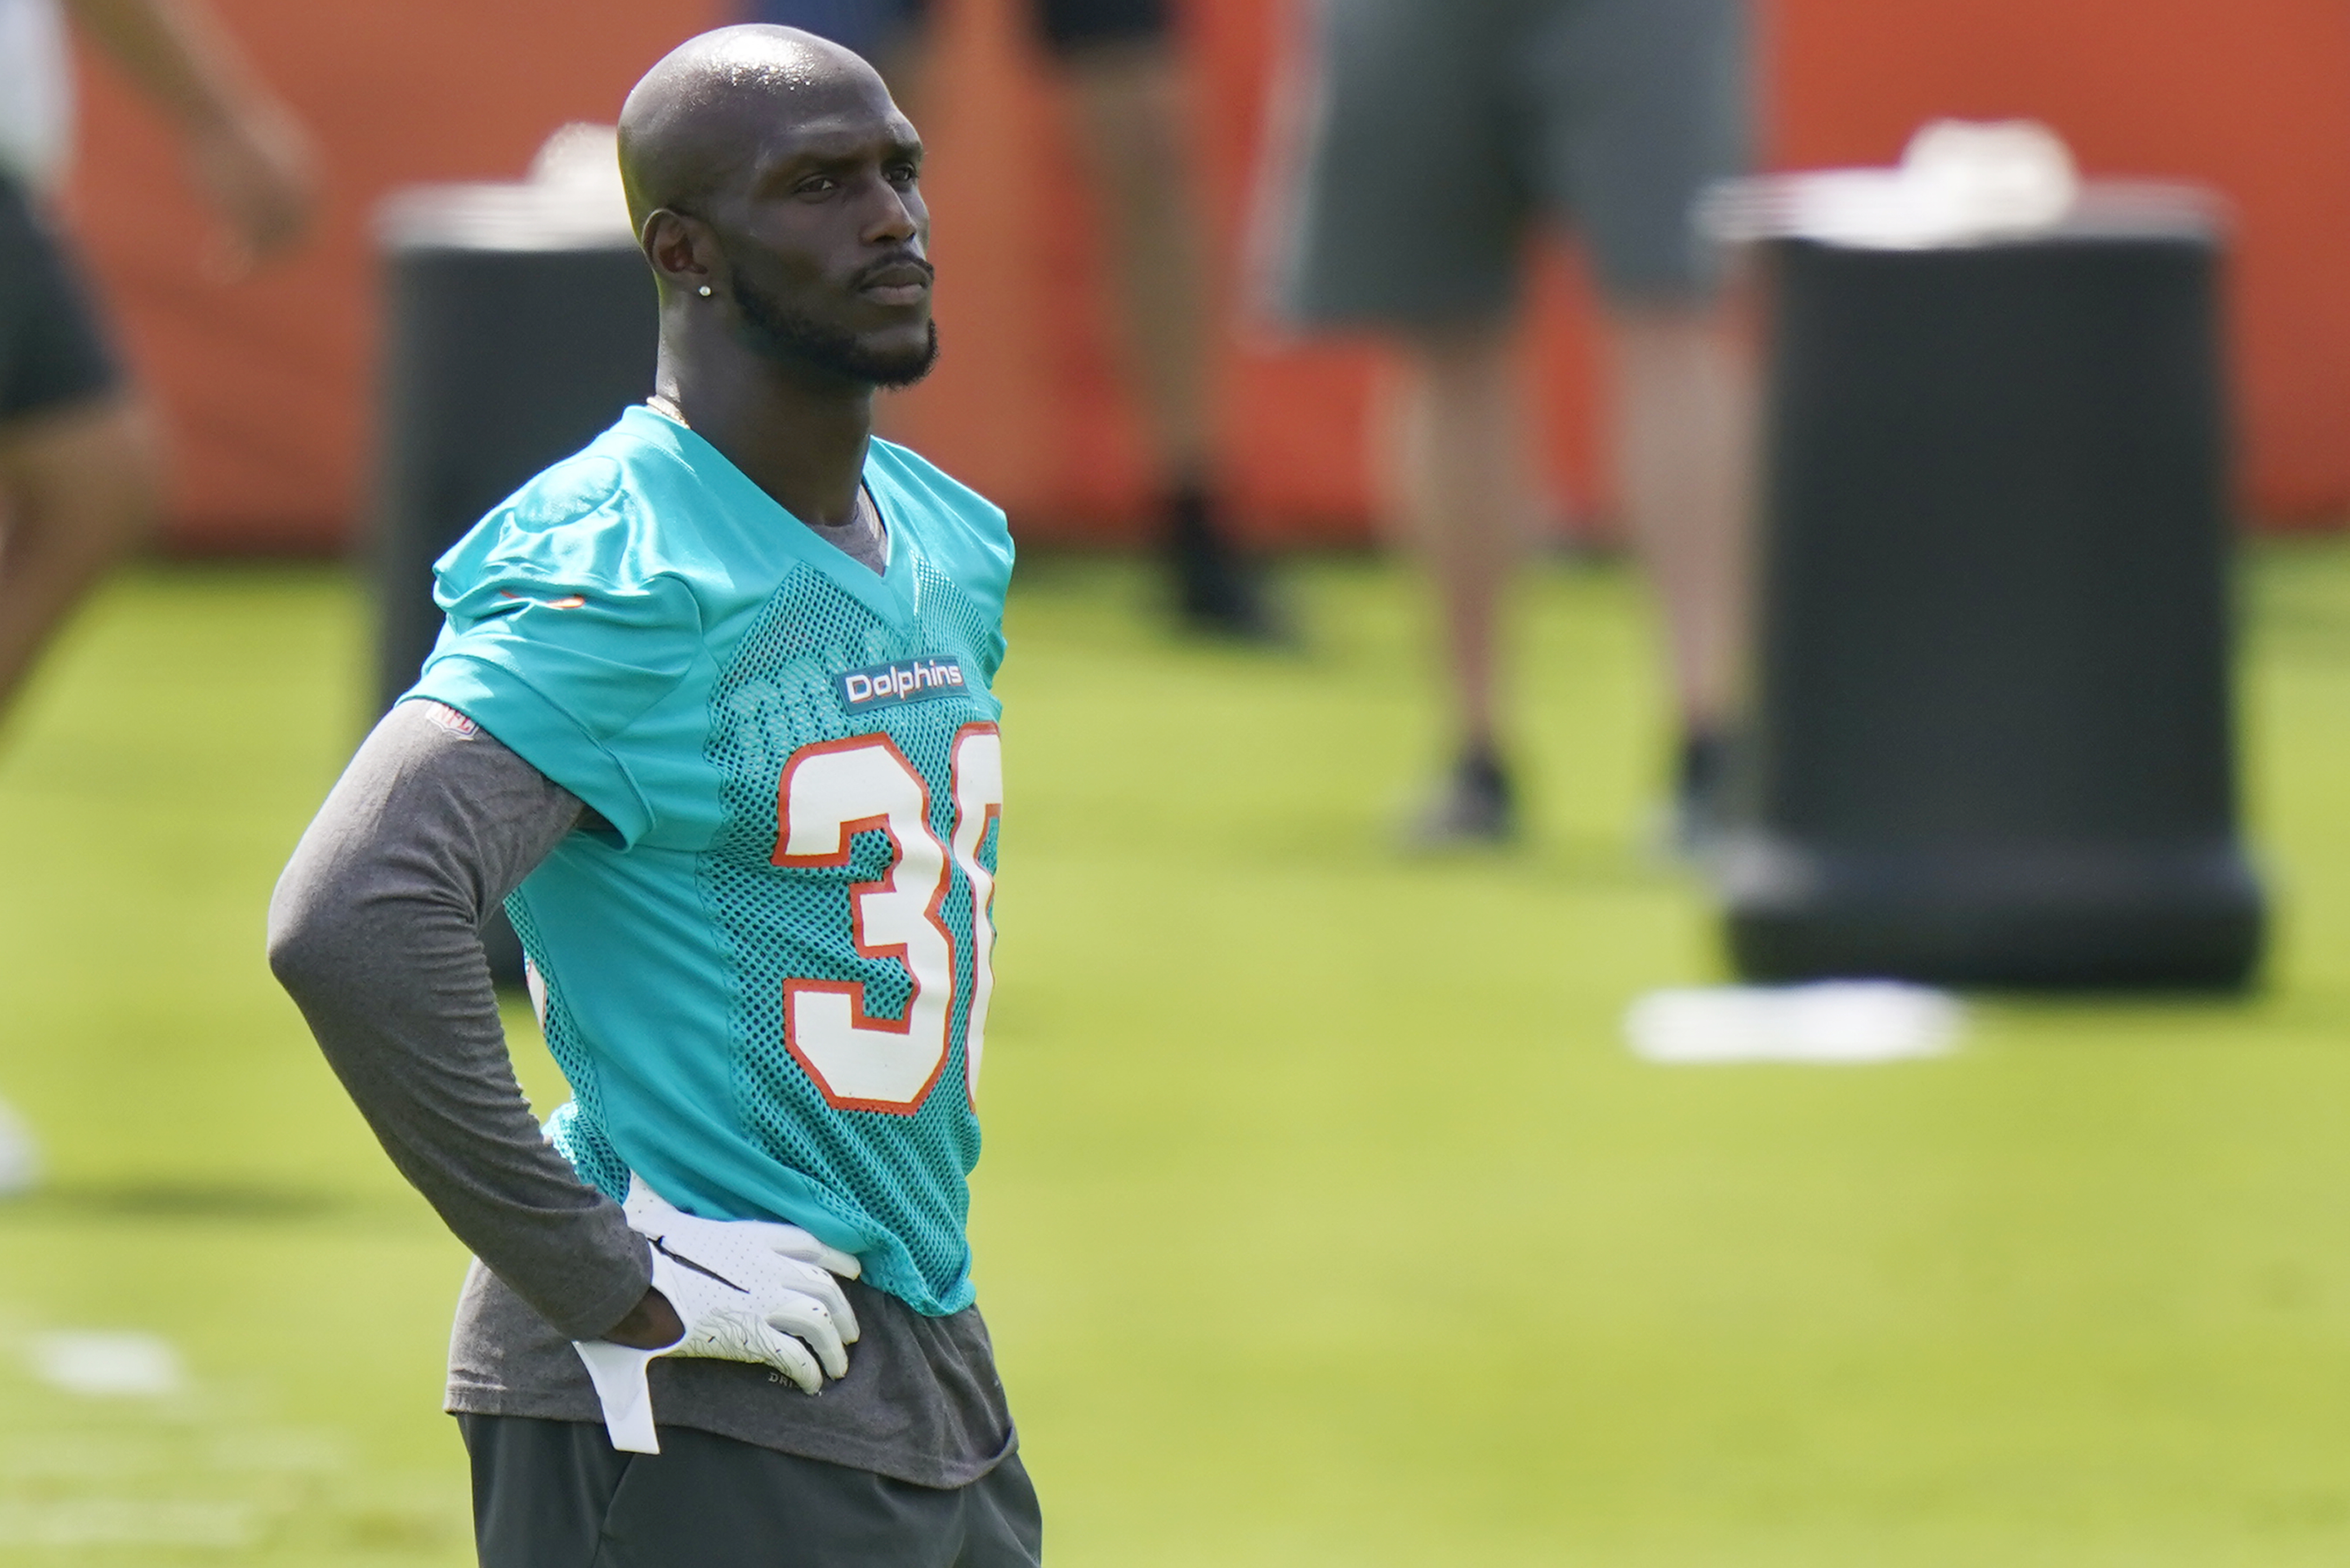 Ex-Rutgers star Jason McCourty assumes leadership role with